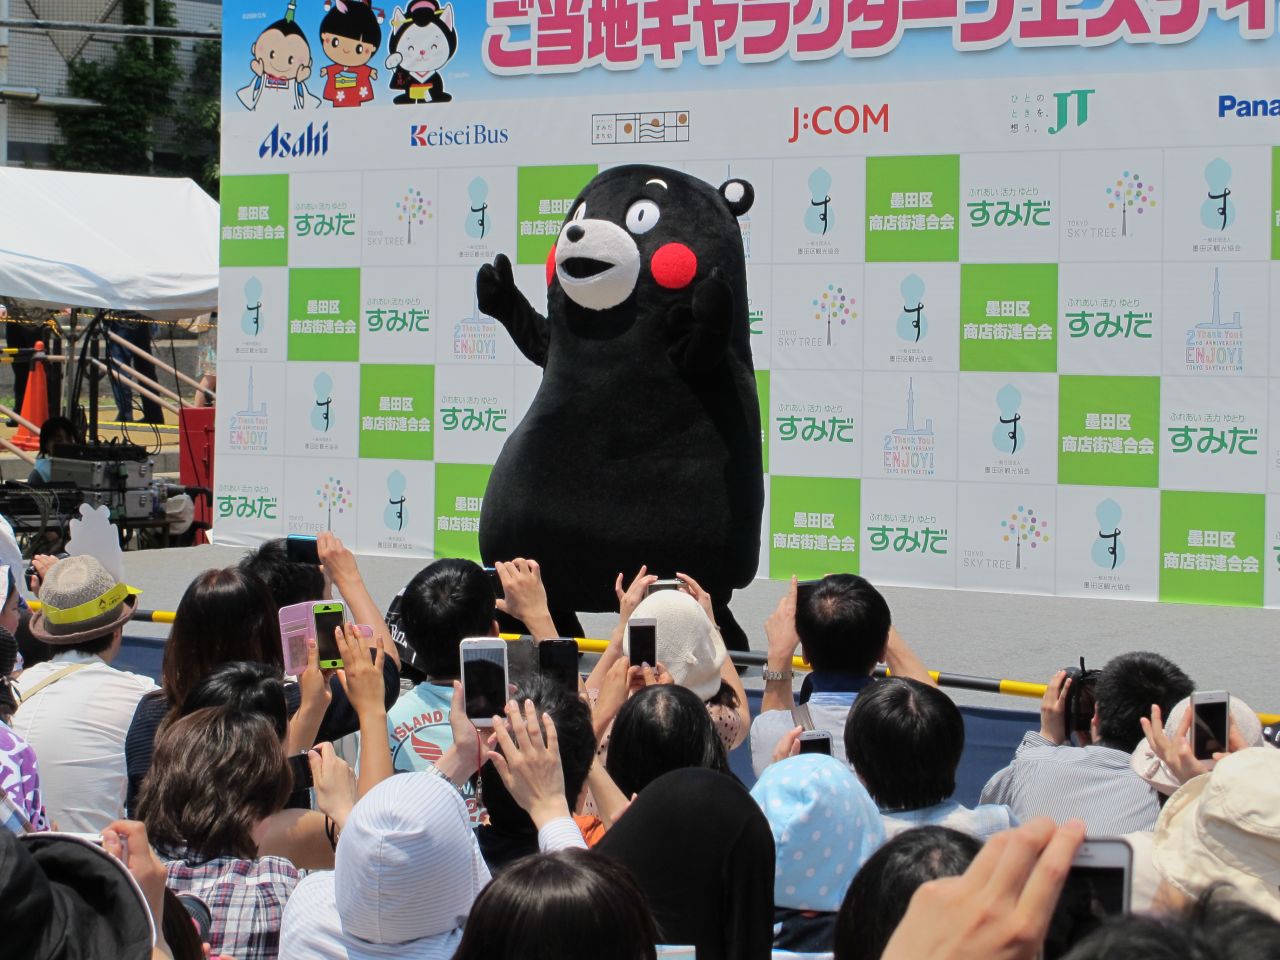 Kumamon, a rosy-cheeked silent black bear waves and dances to music as his fans snap photos. Kumamon is a ubiquitous presence in Japan, advertising everything from food and drinks to video games, and of course, his prefecture of origin, Kumamoto.